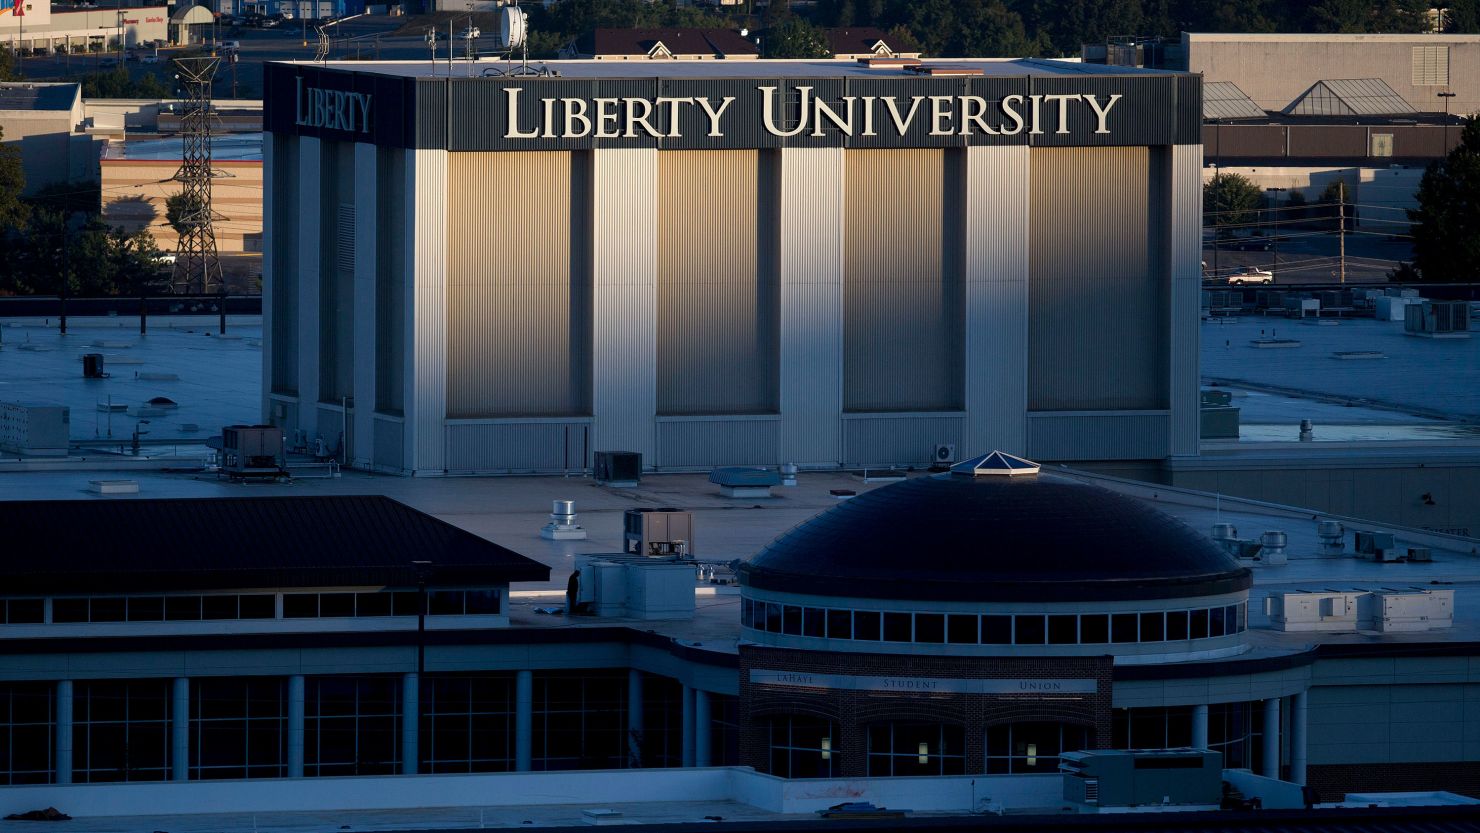 The campus of Liberty University in Lynchburg, Virginia, on September 14, 2015.